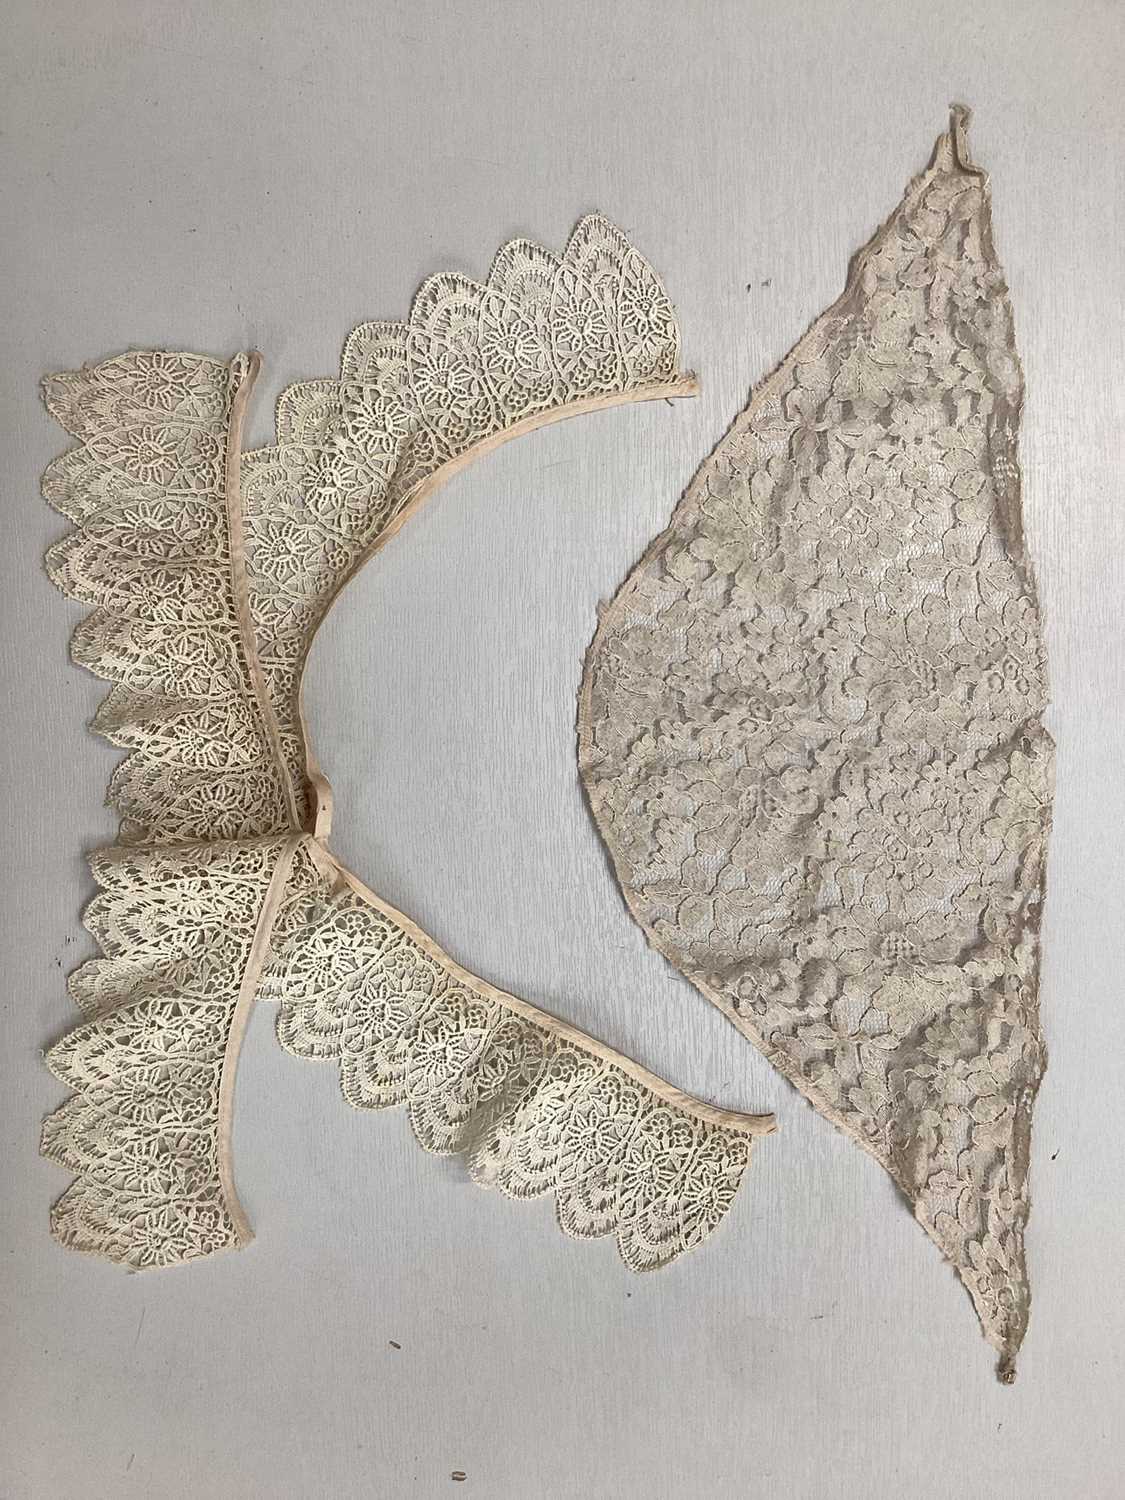 Selection of lace items including collars and cuffs, bobbin lace, blonde lace , metallic thread lace - Image 12 of 12